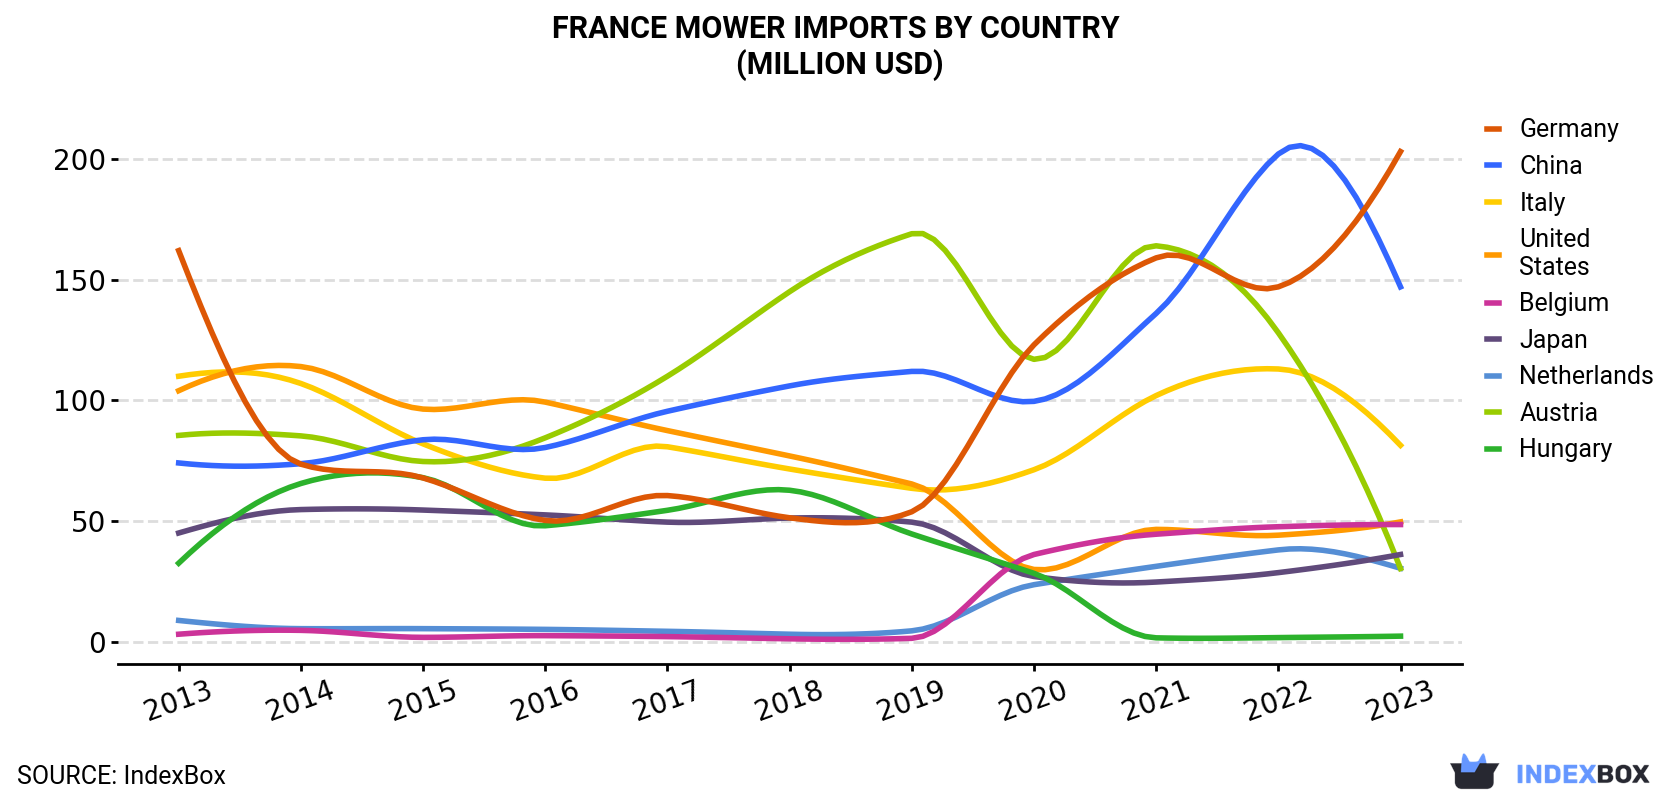 France Mower Imports By Country (Million USD)